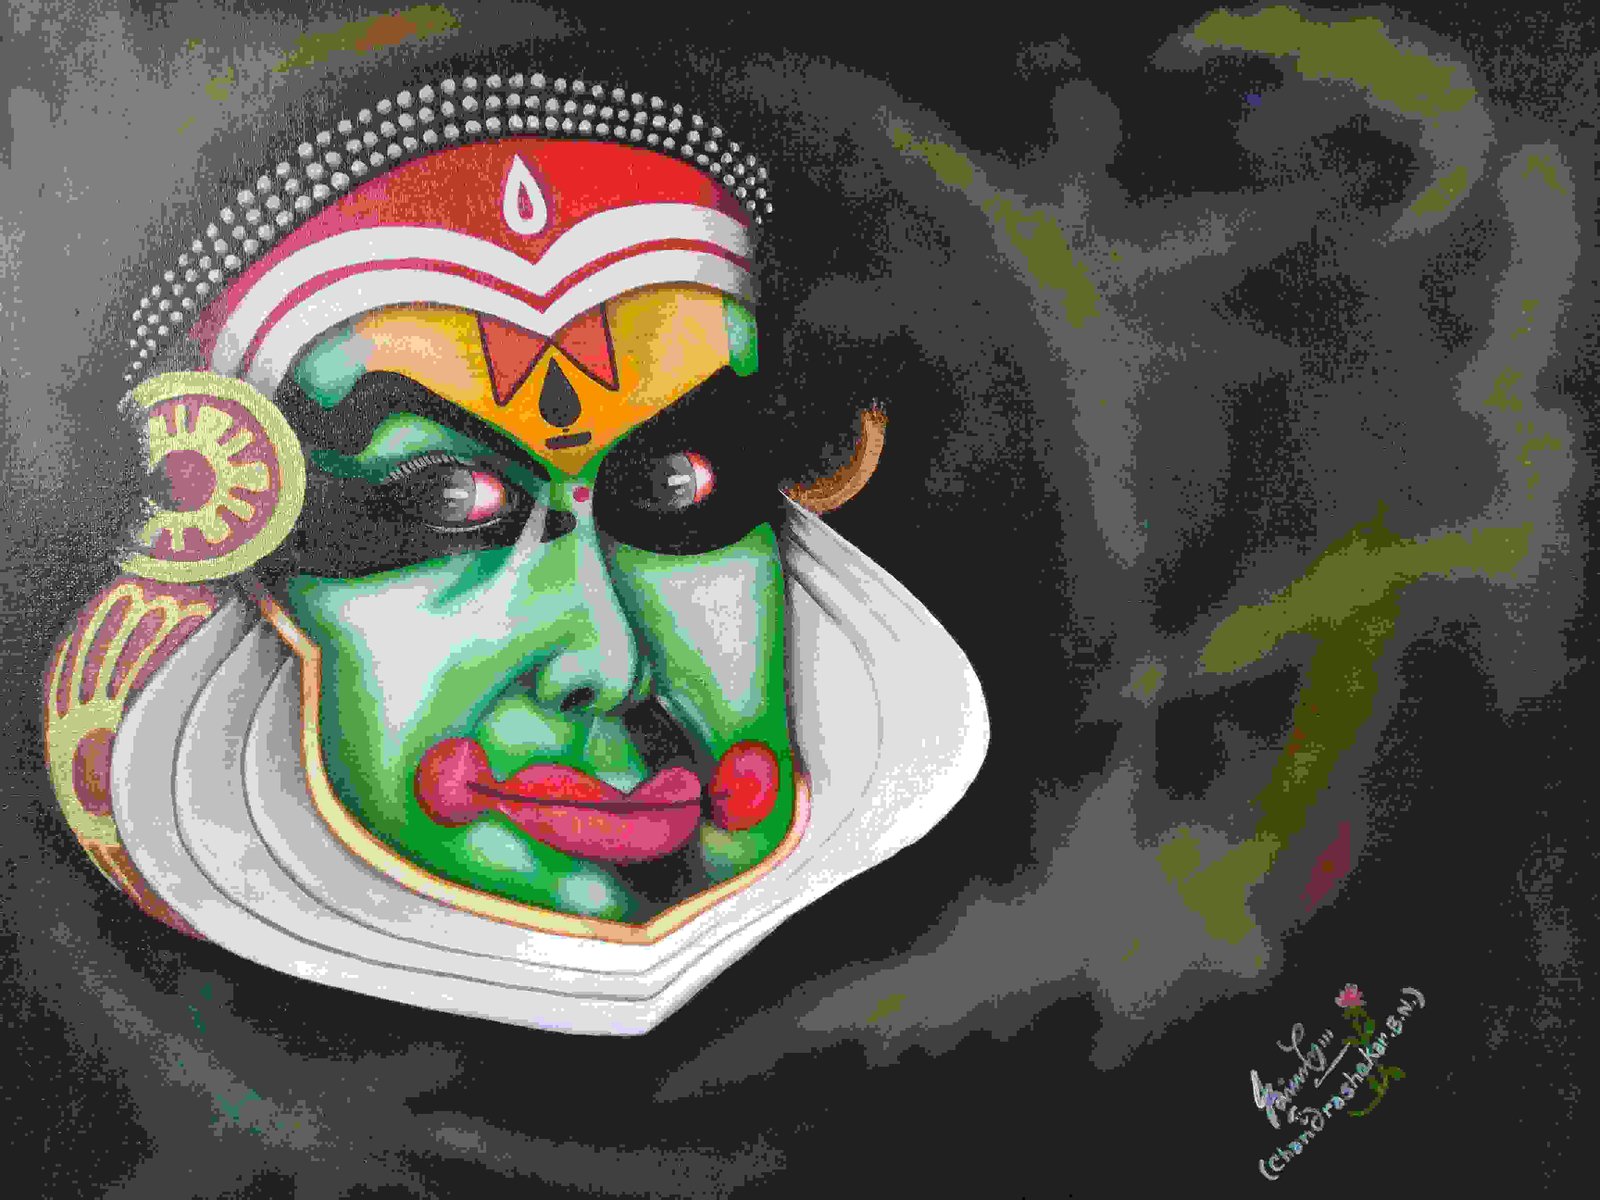 Painting Of Kathakali In Acrylic On Canvas Size 2x3 Foot